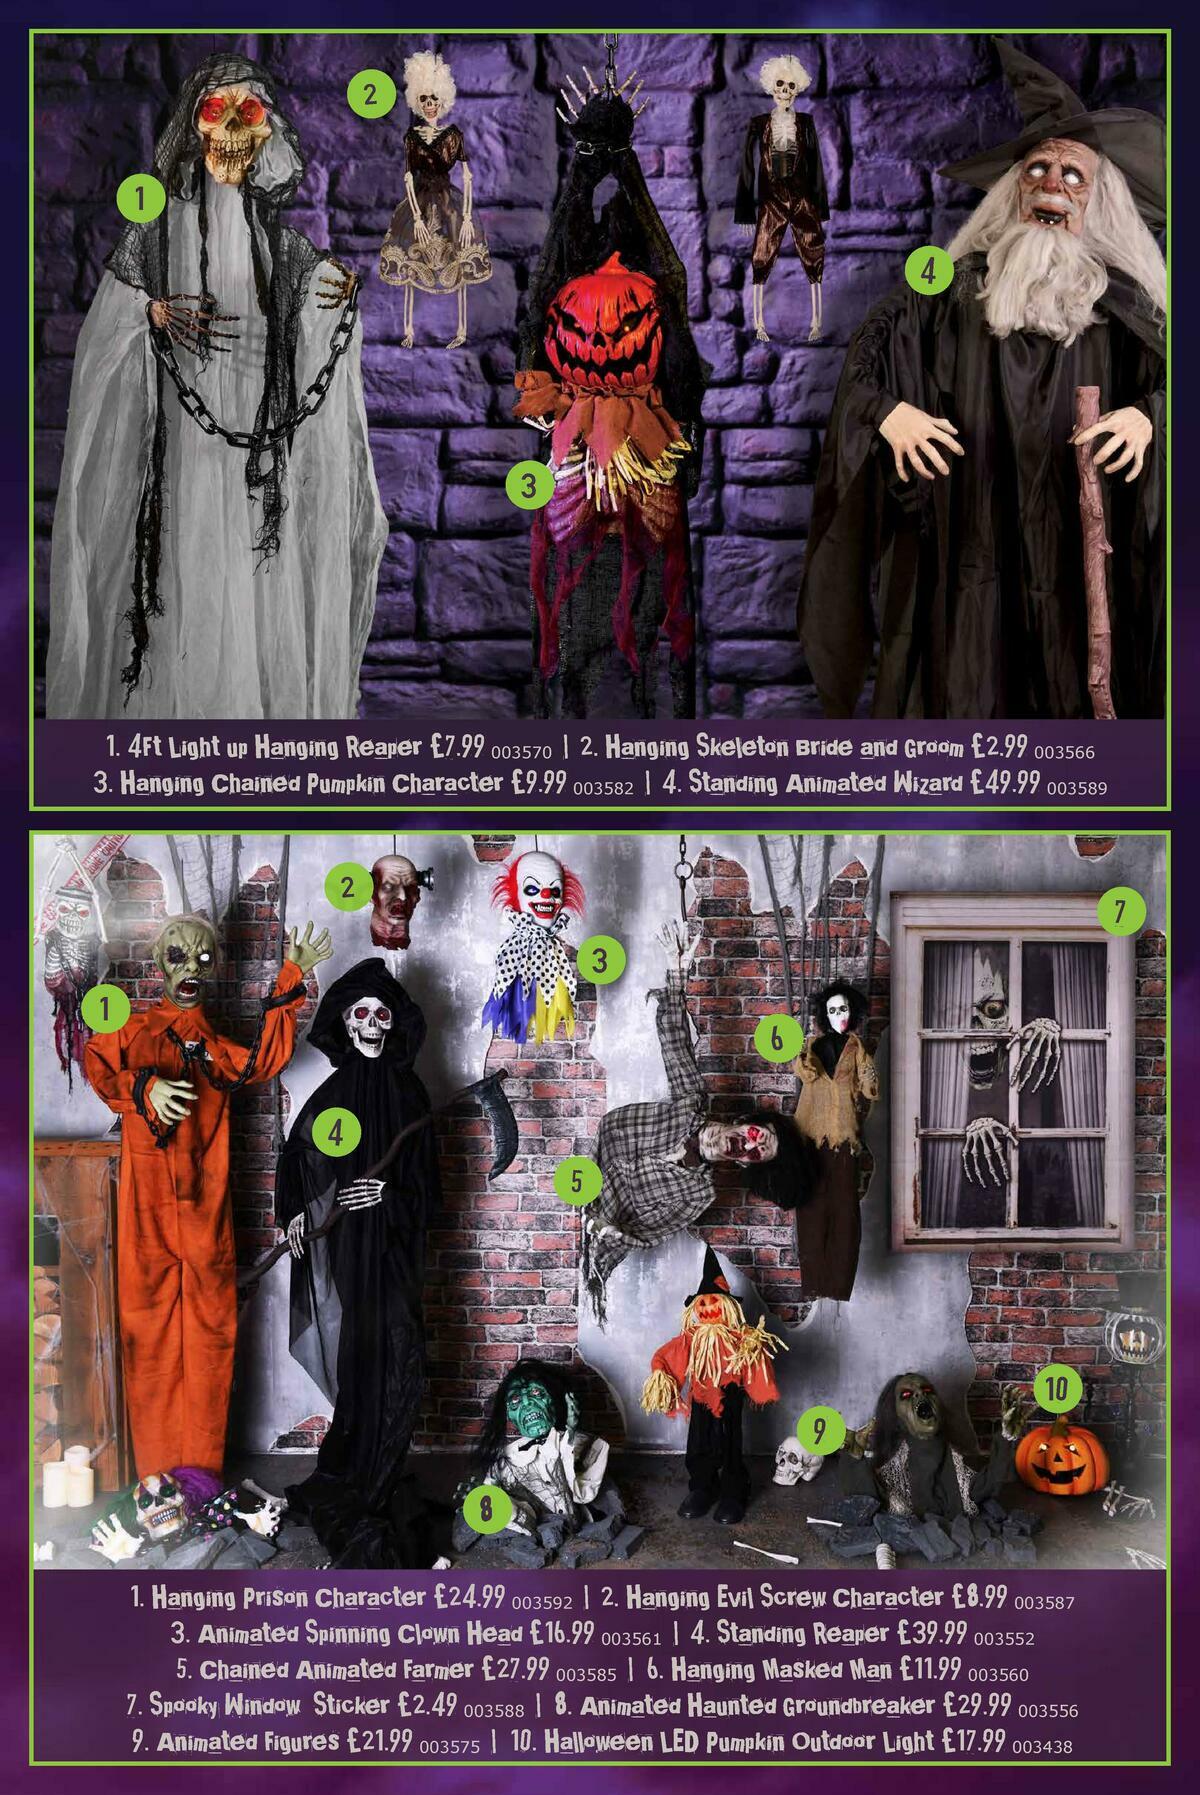 The Range Halloween Offers from 17 August